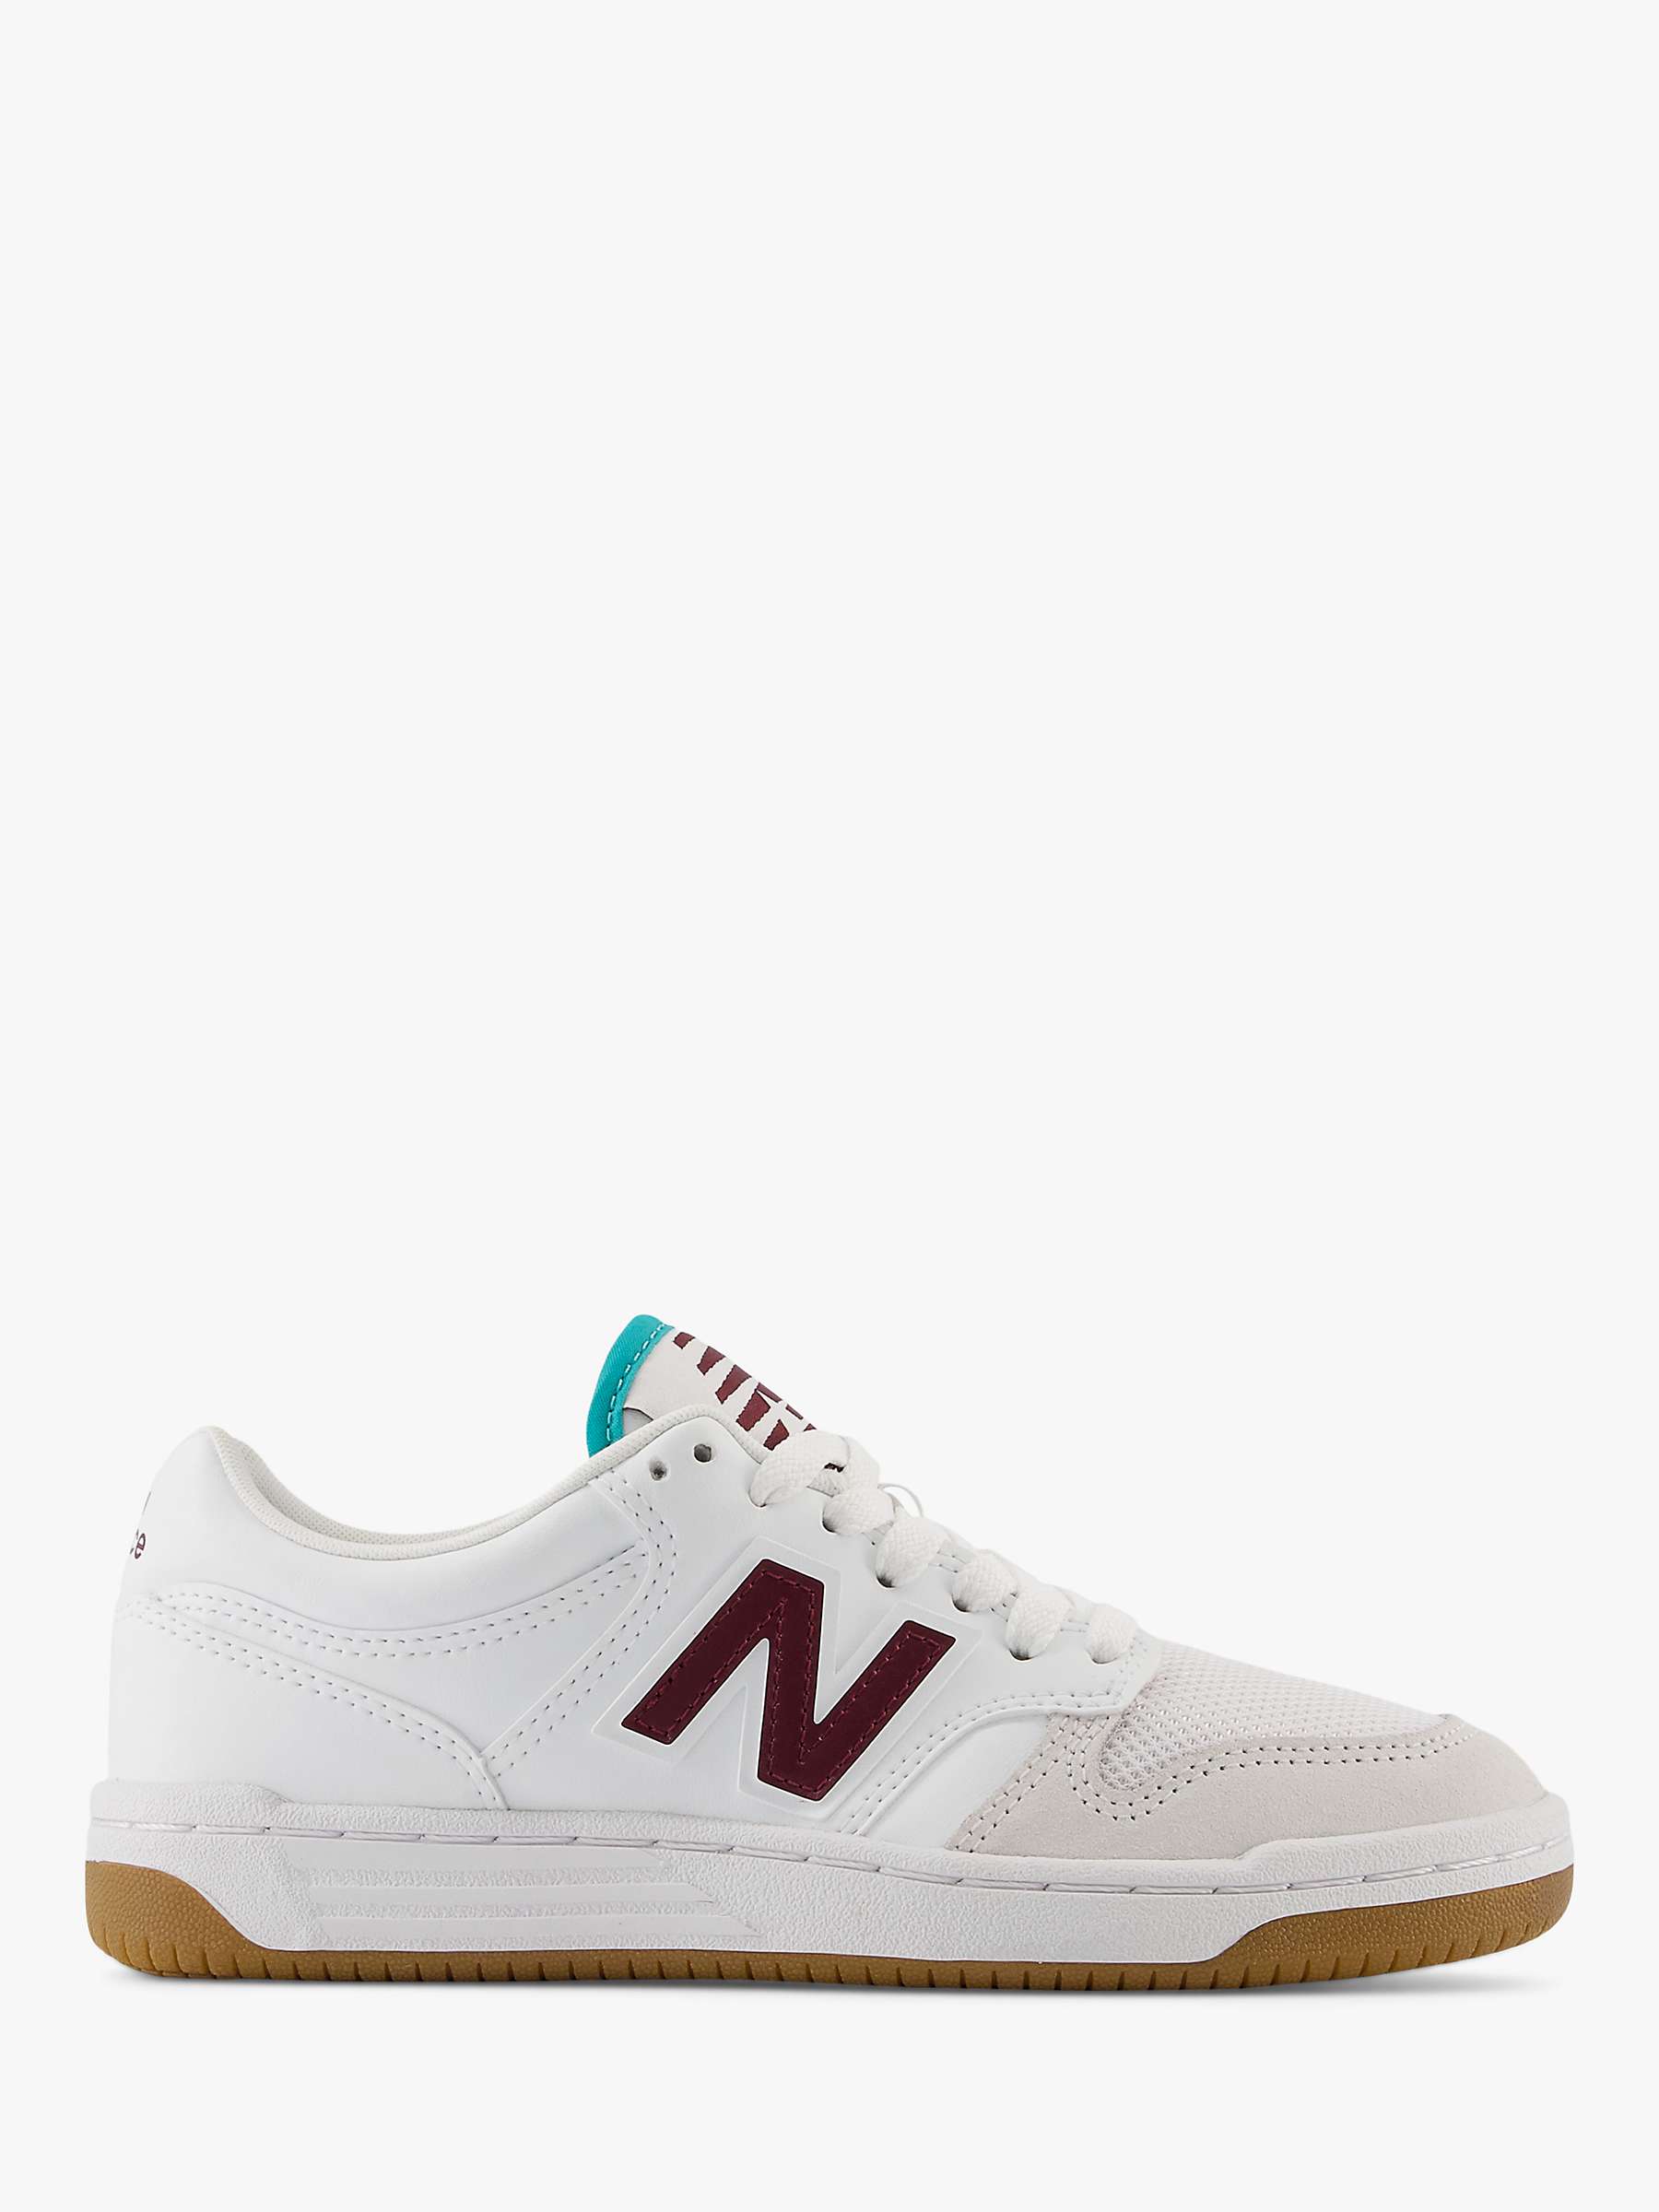 Buy New Balance Kids' 480 Basketball Style Lace Up Trainers, White Online at johnlewis.com